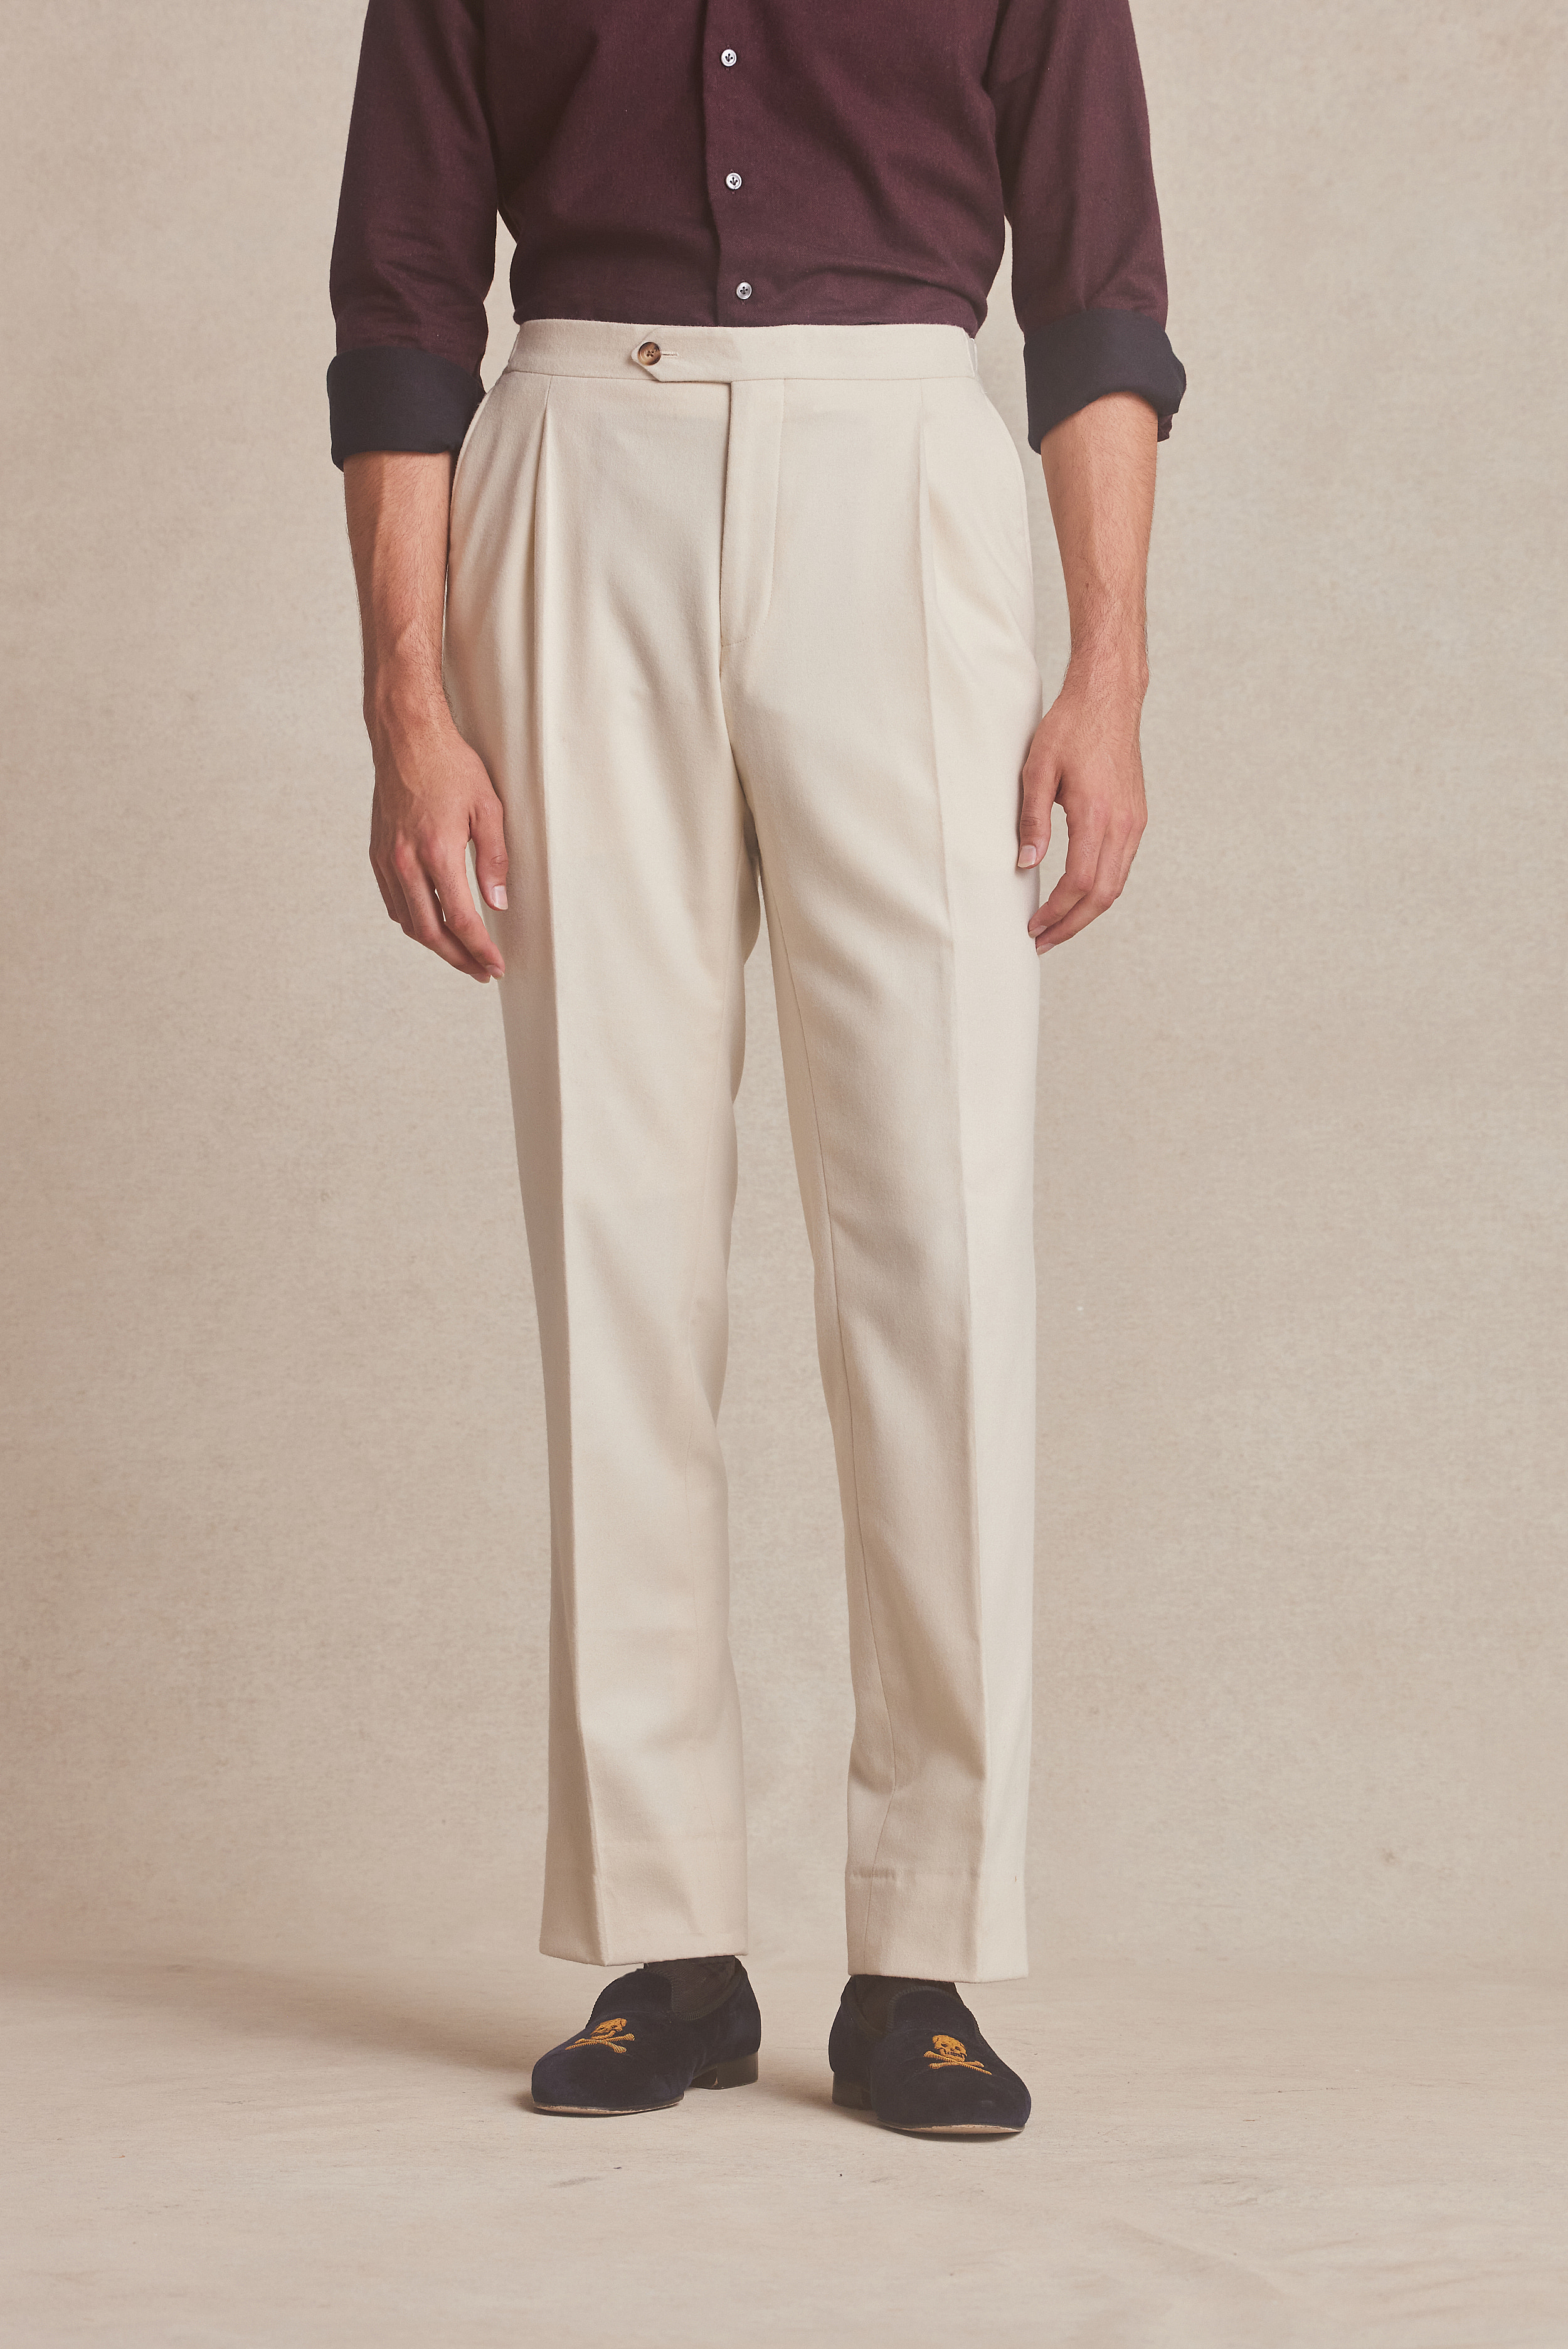 Mens Pleated Pants  The Ultimate Guide  Berle